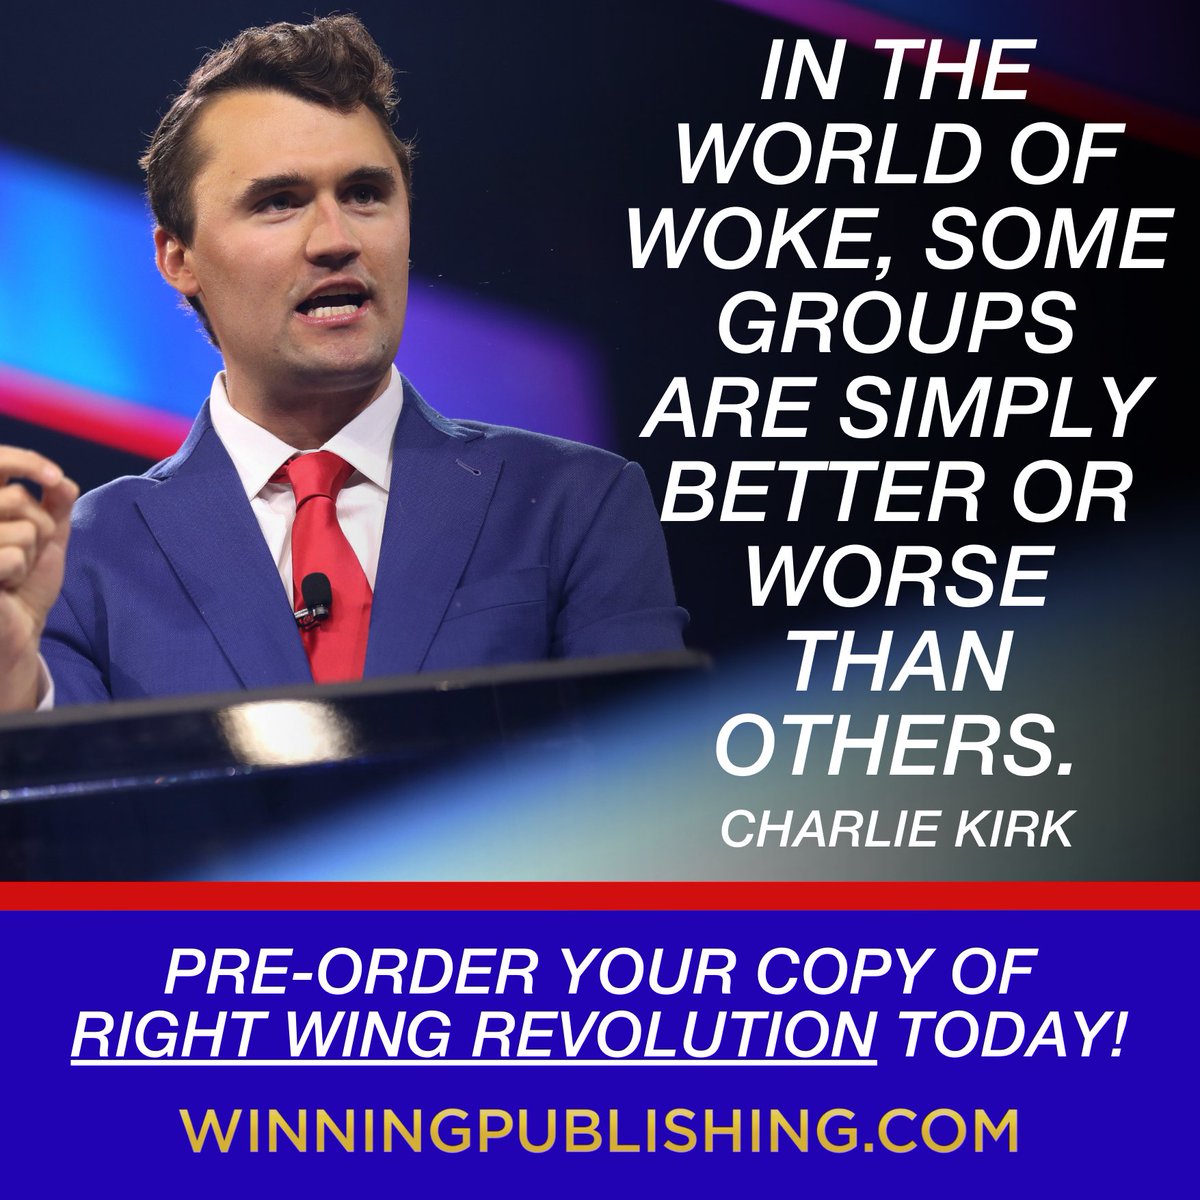 Secure your copy of RIGHT WING REVOLUTION today at WINNINGPUBLISHING.com!